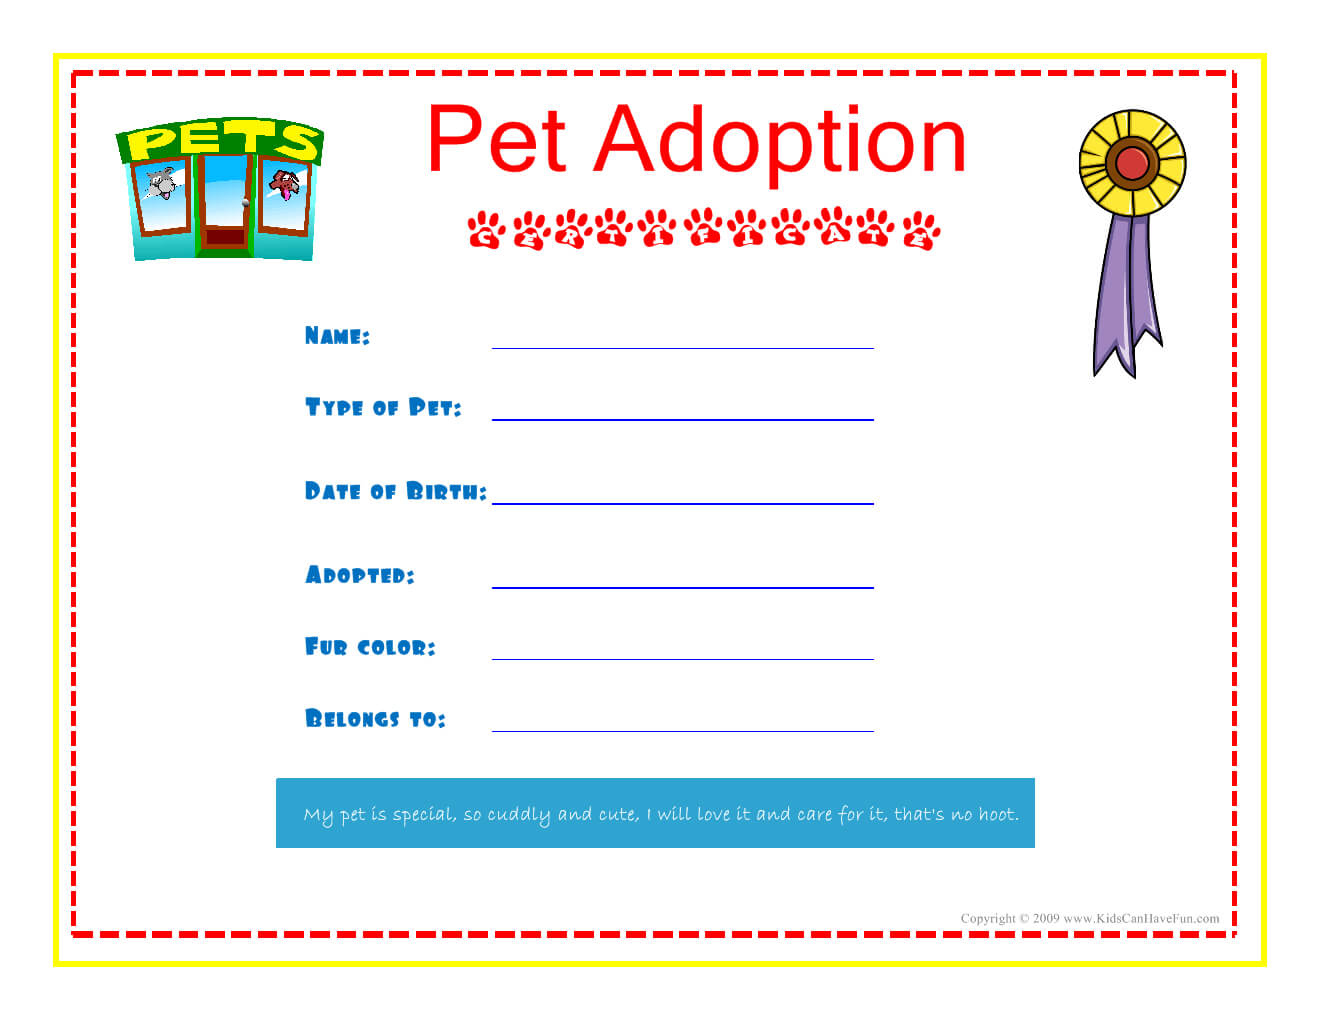 Pet Adoption Certificate For The Kids To Fill Out About Intended For Pet Adoption Certificate Template